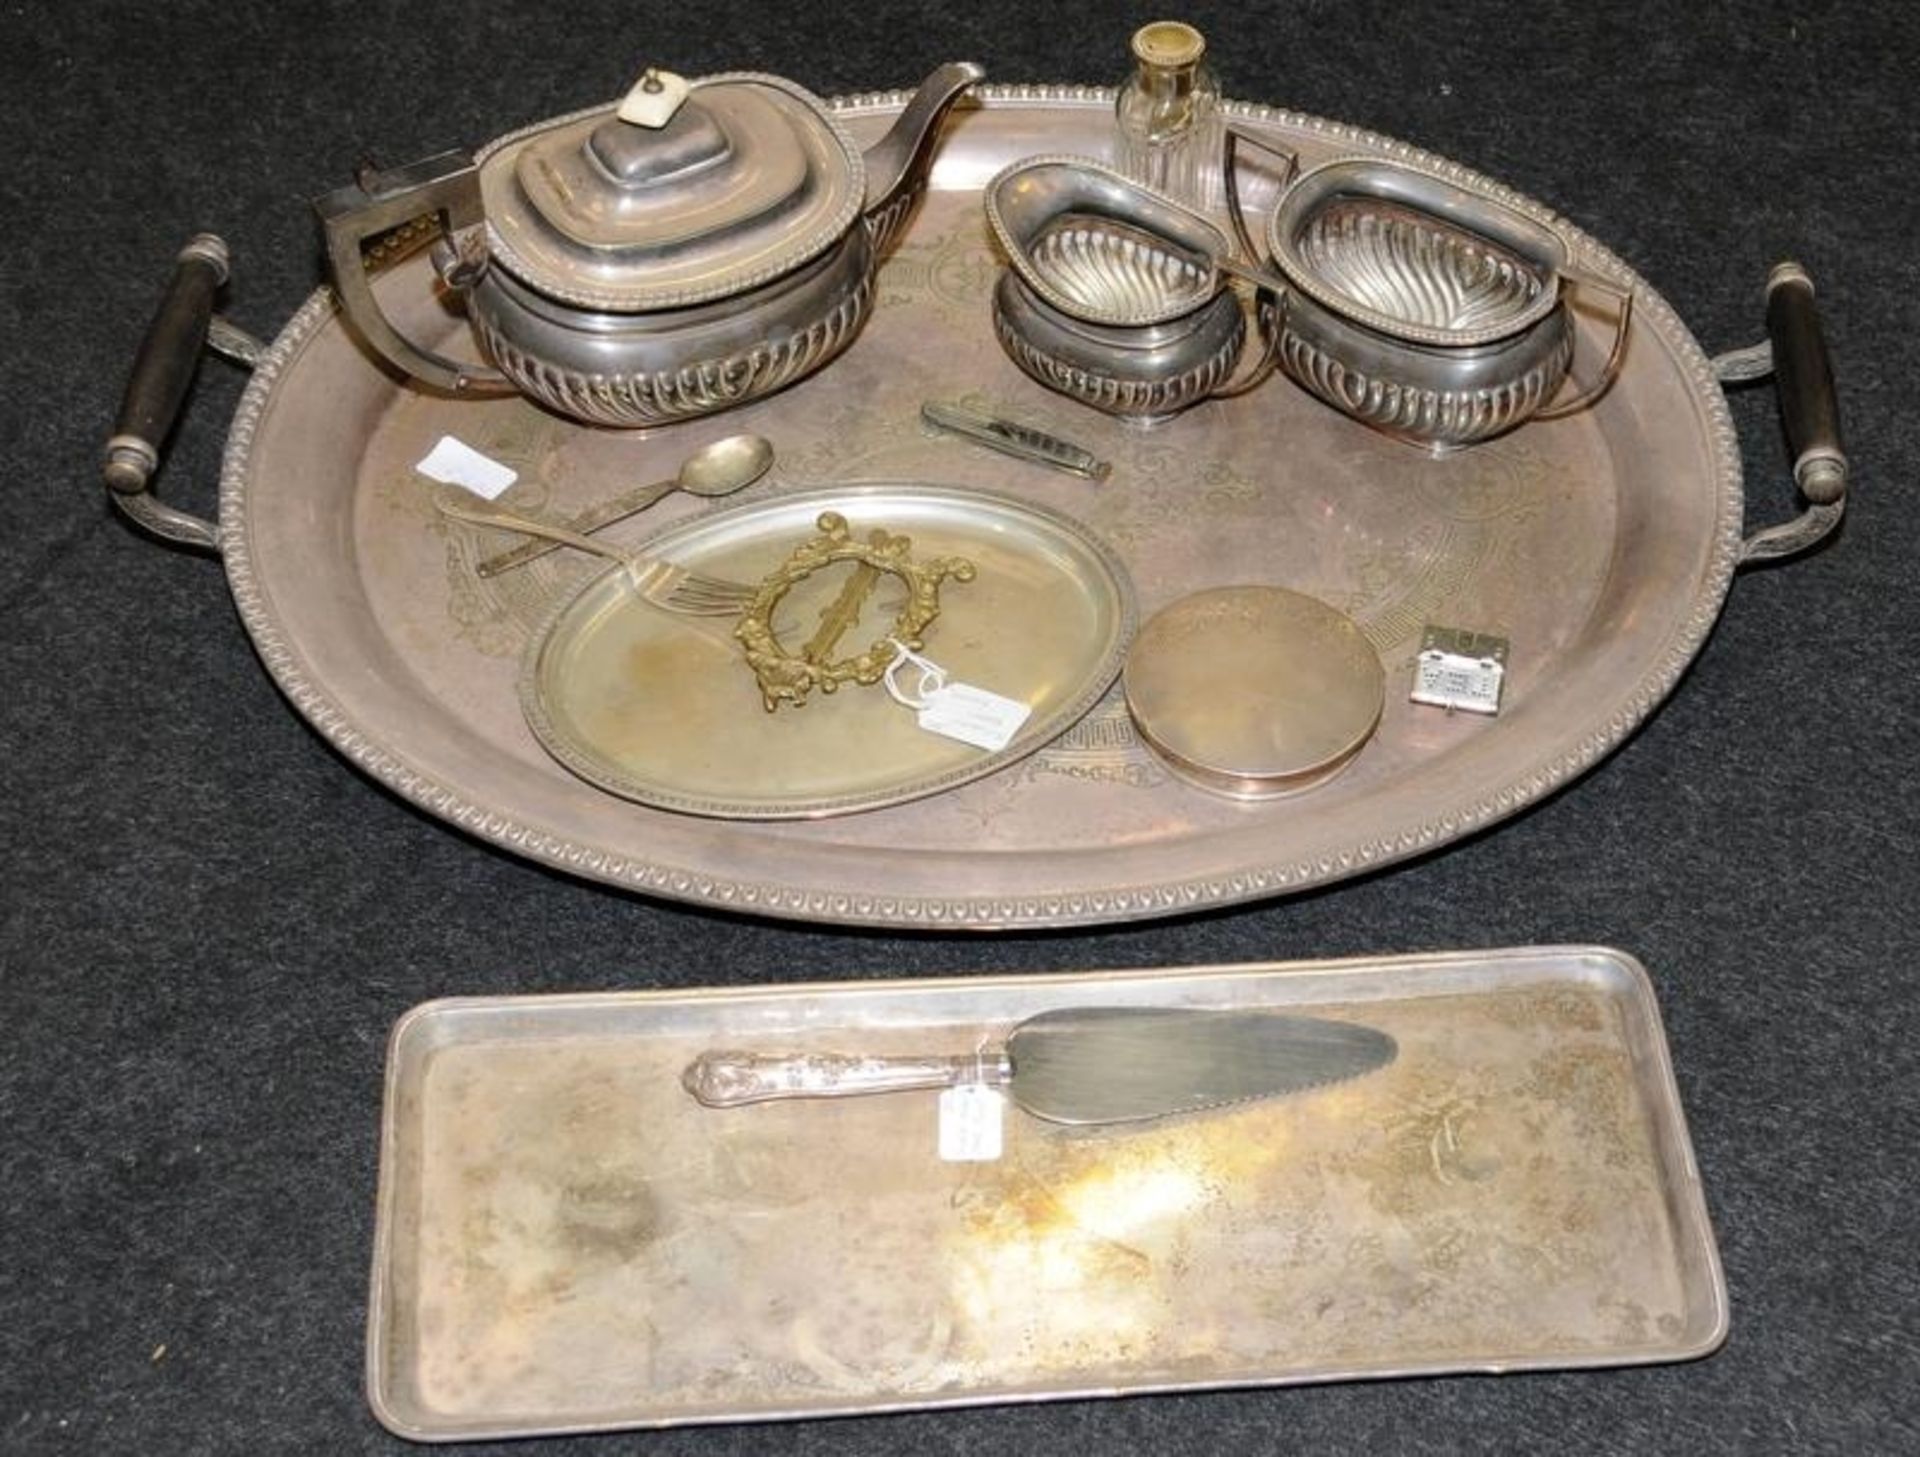 Collection of silver plate to include a large twin handled tray 67cms across including handles